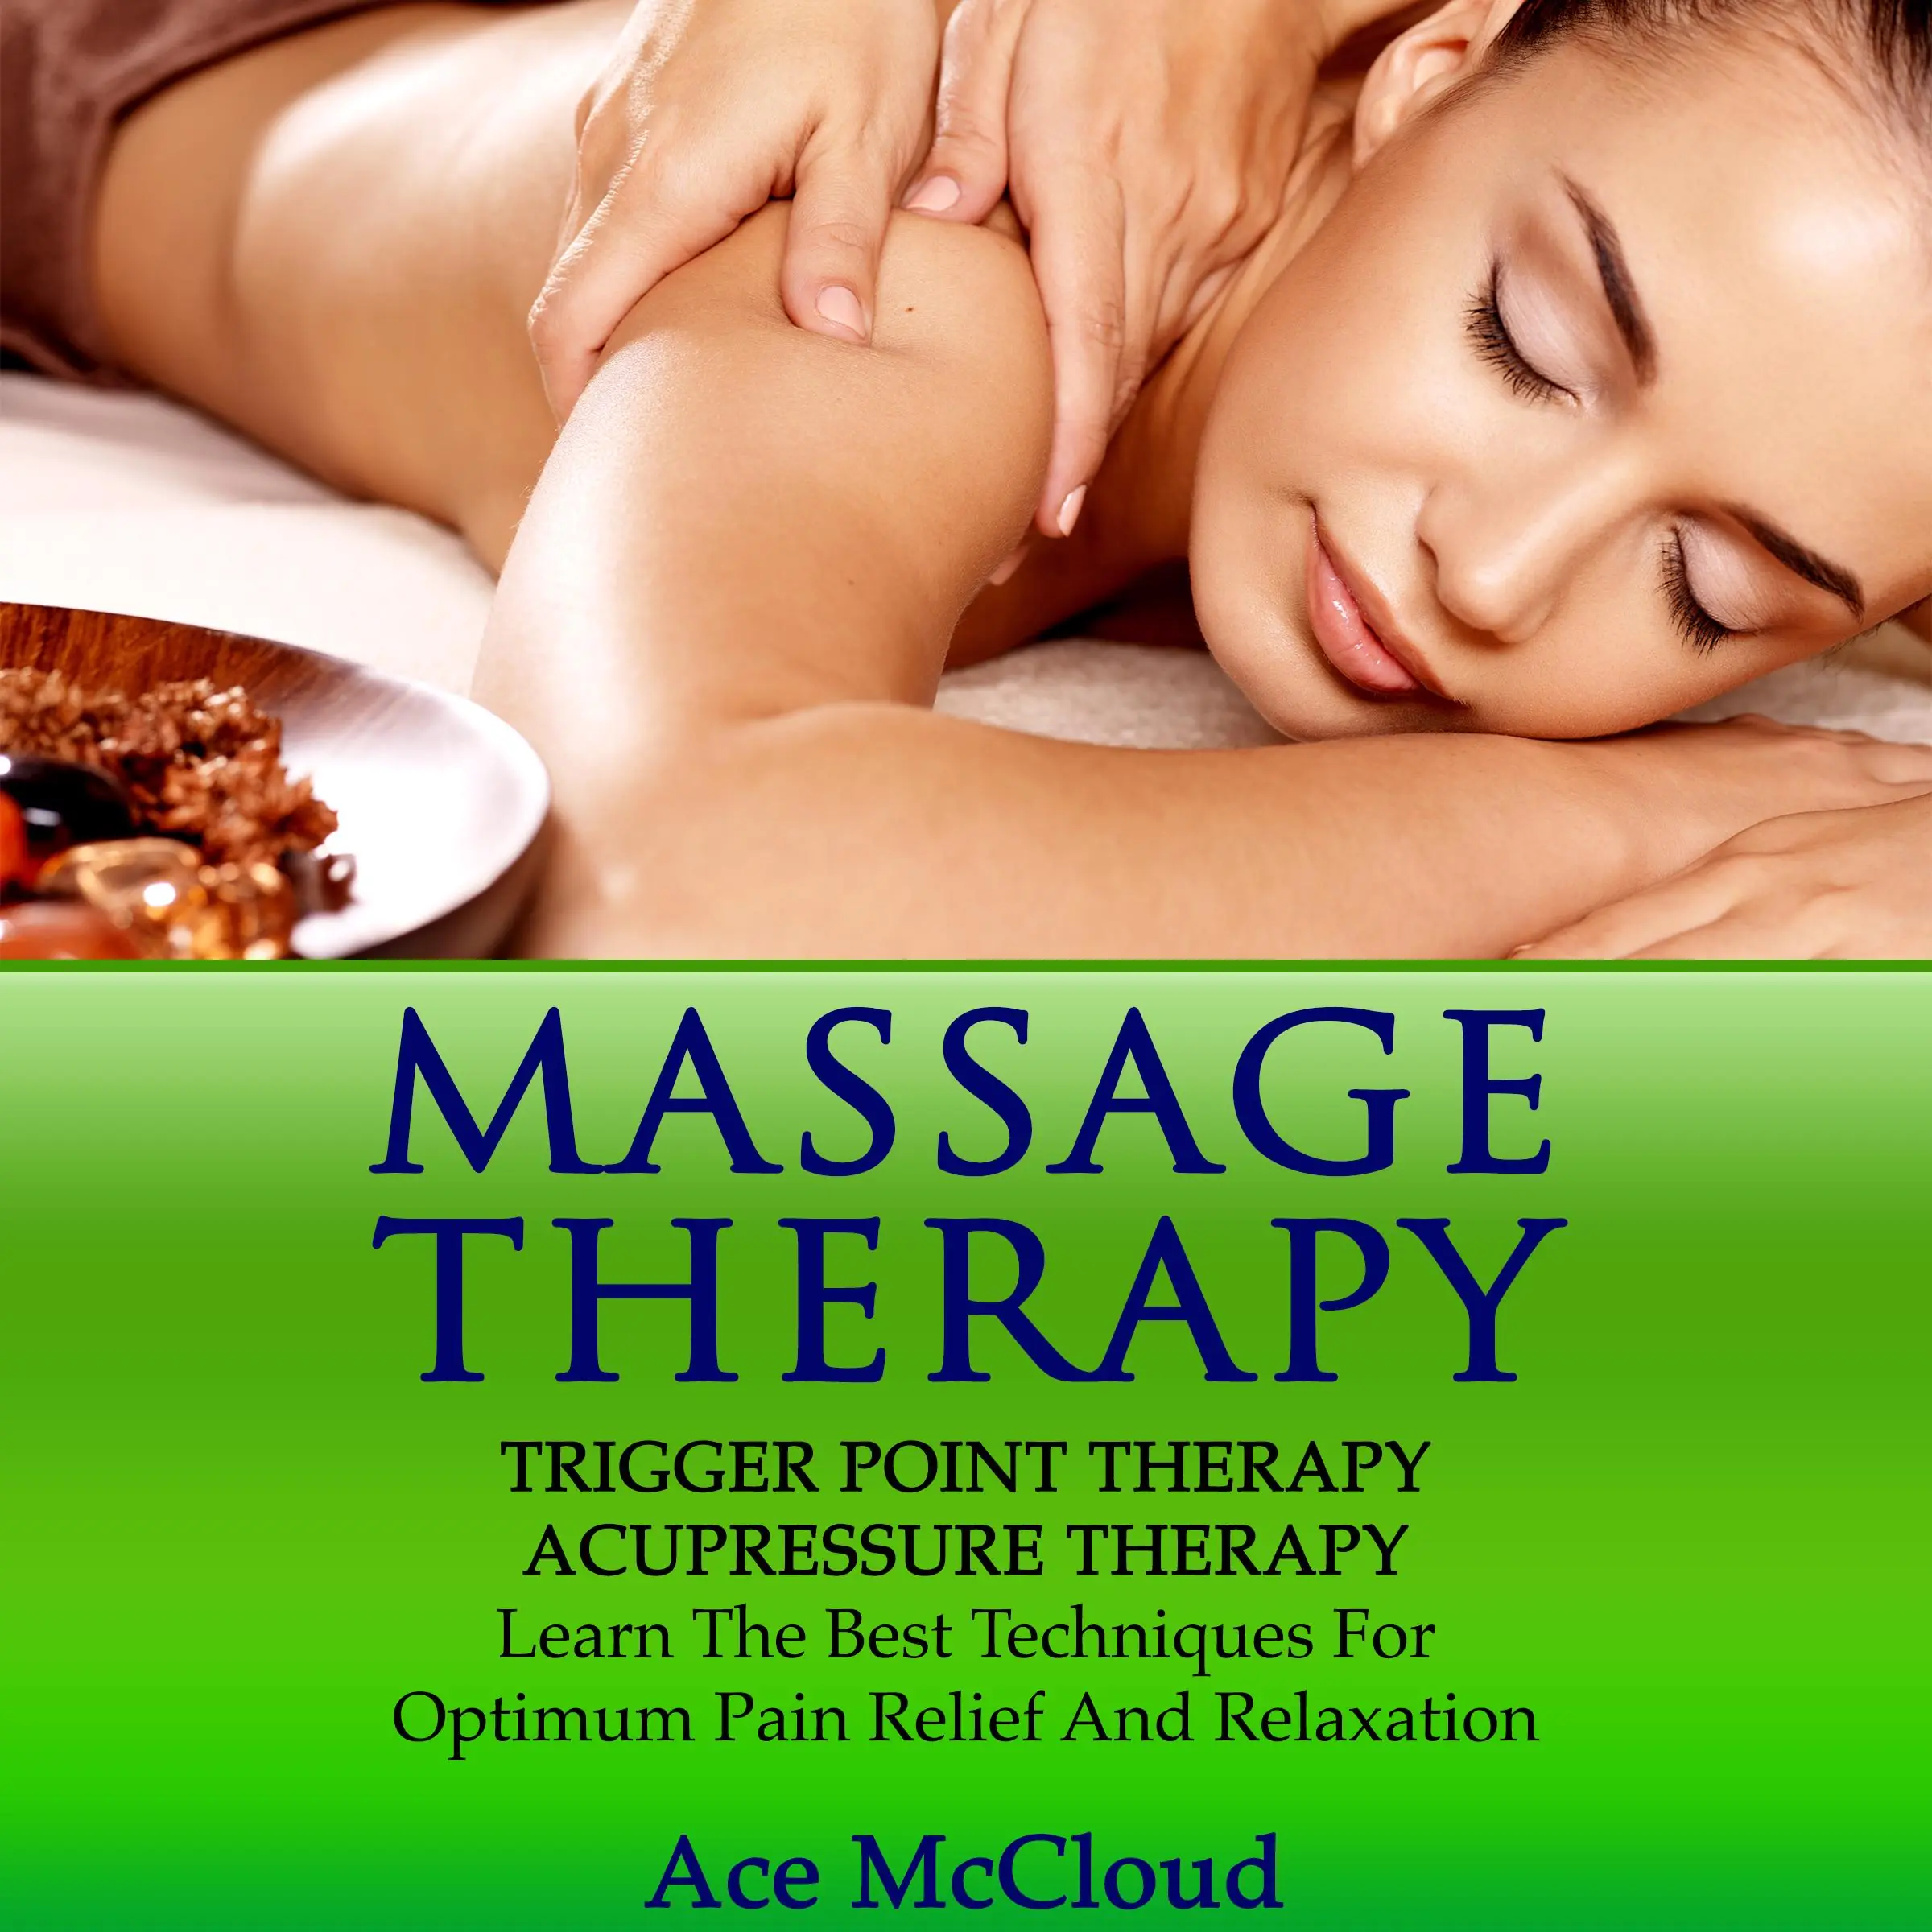 Massage Therapy: Trigger Point Therapy: Acupressure Therapy: Learn The Best Techniques For Optimum Pain Relief And Relaxation Audiobook by Ace McCloud